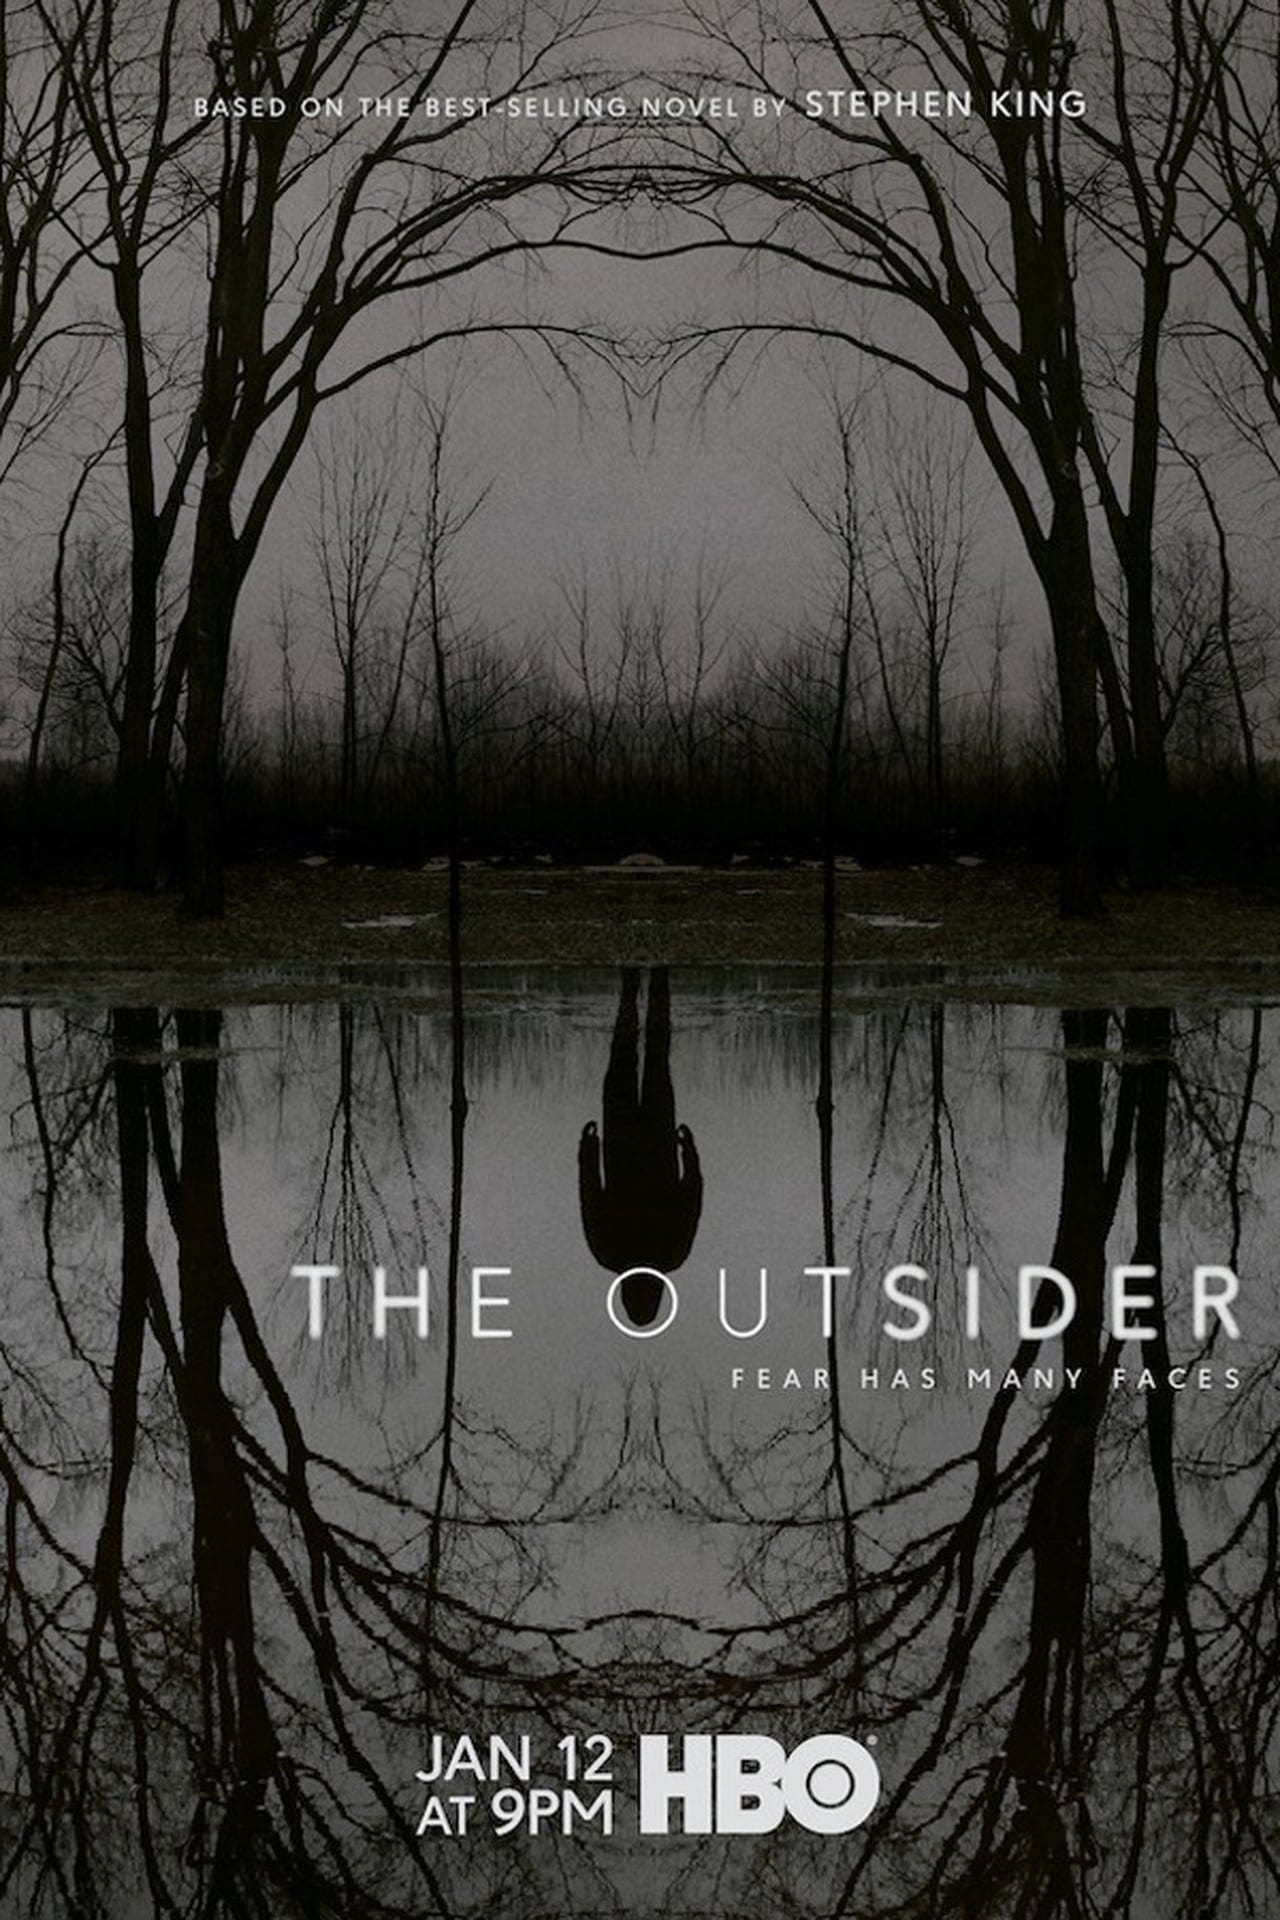 The Outsider audiobook - a masterpiece by Stephen King